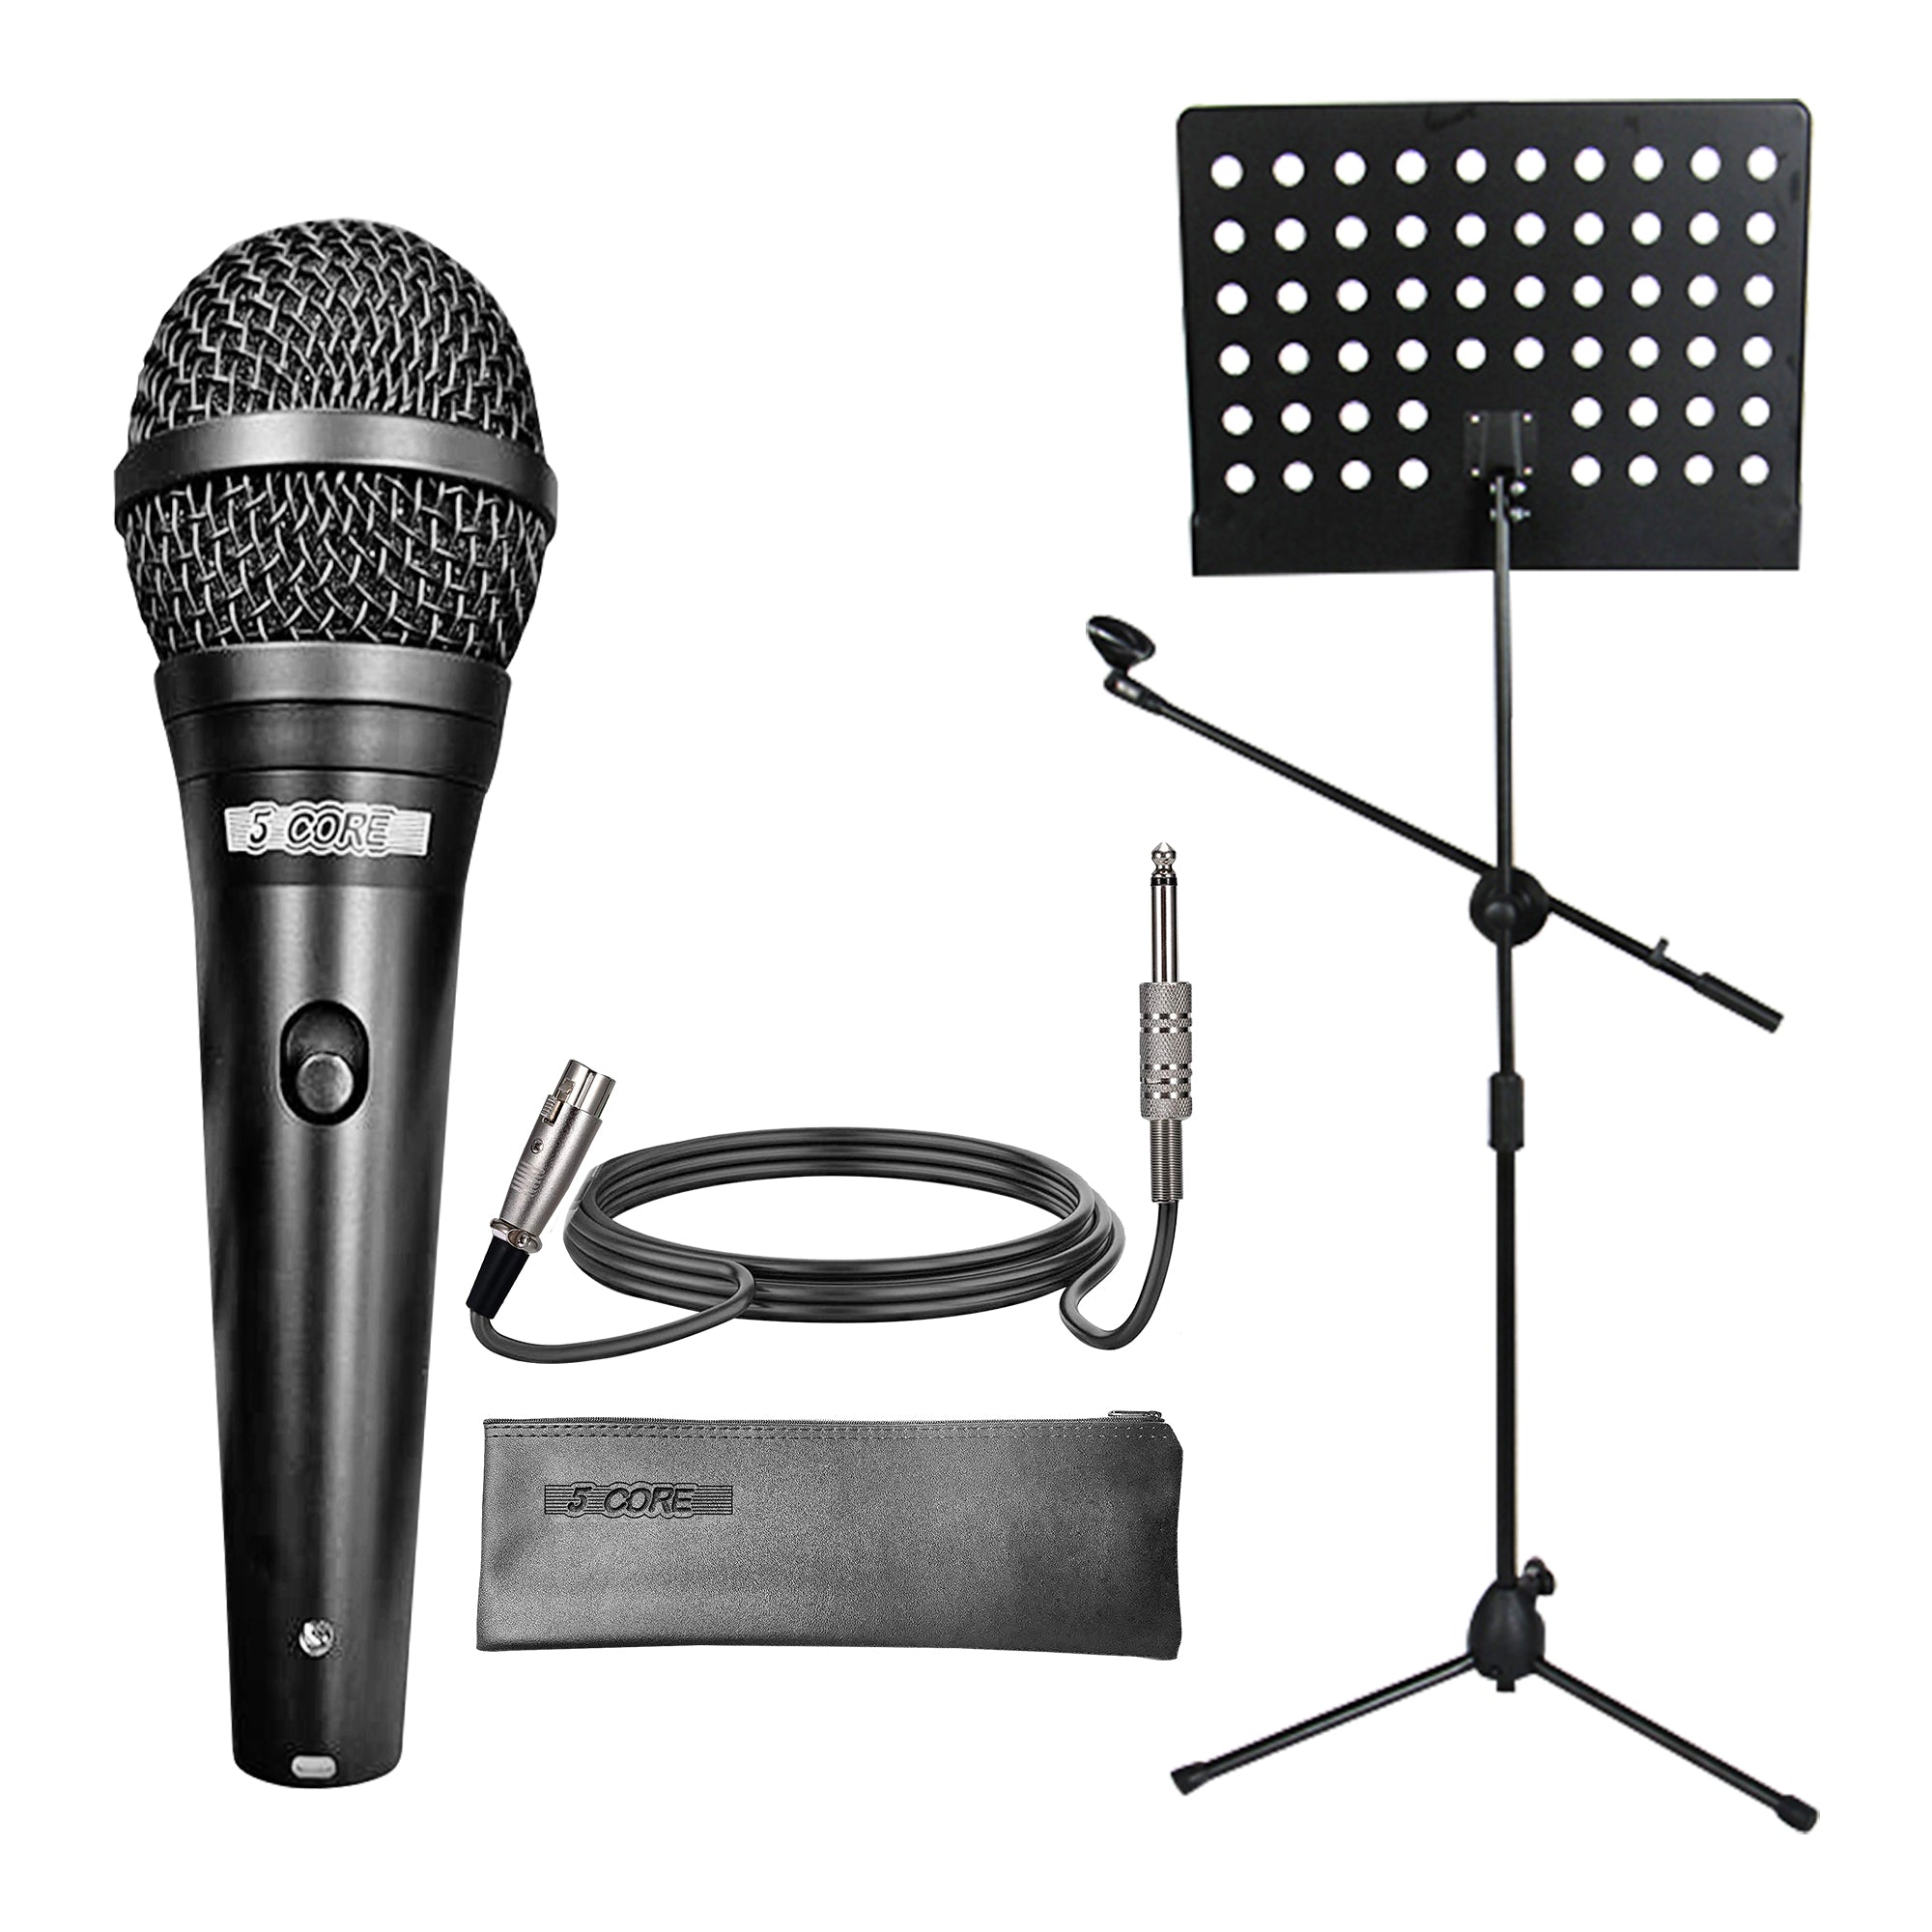 5 Core Mic Stand Combo Tripod Stand with Music Sheet Holder Premium Vocal Dynamic Mic Includes Cable and Carry Bag - MUS MH+ND58BLK